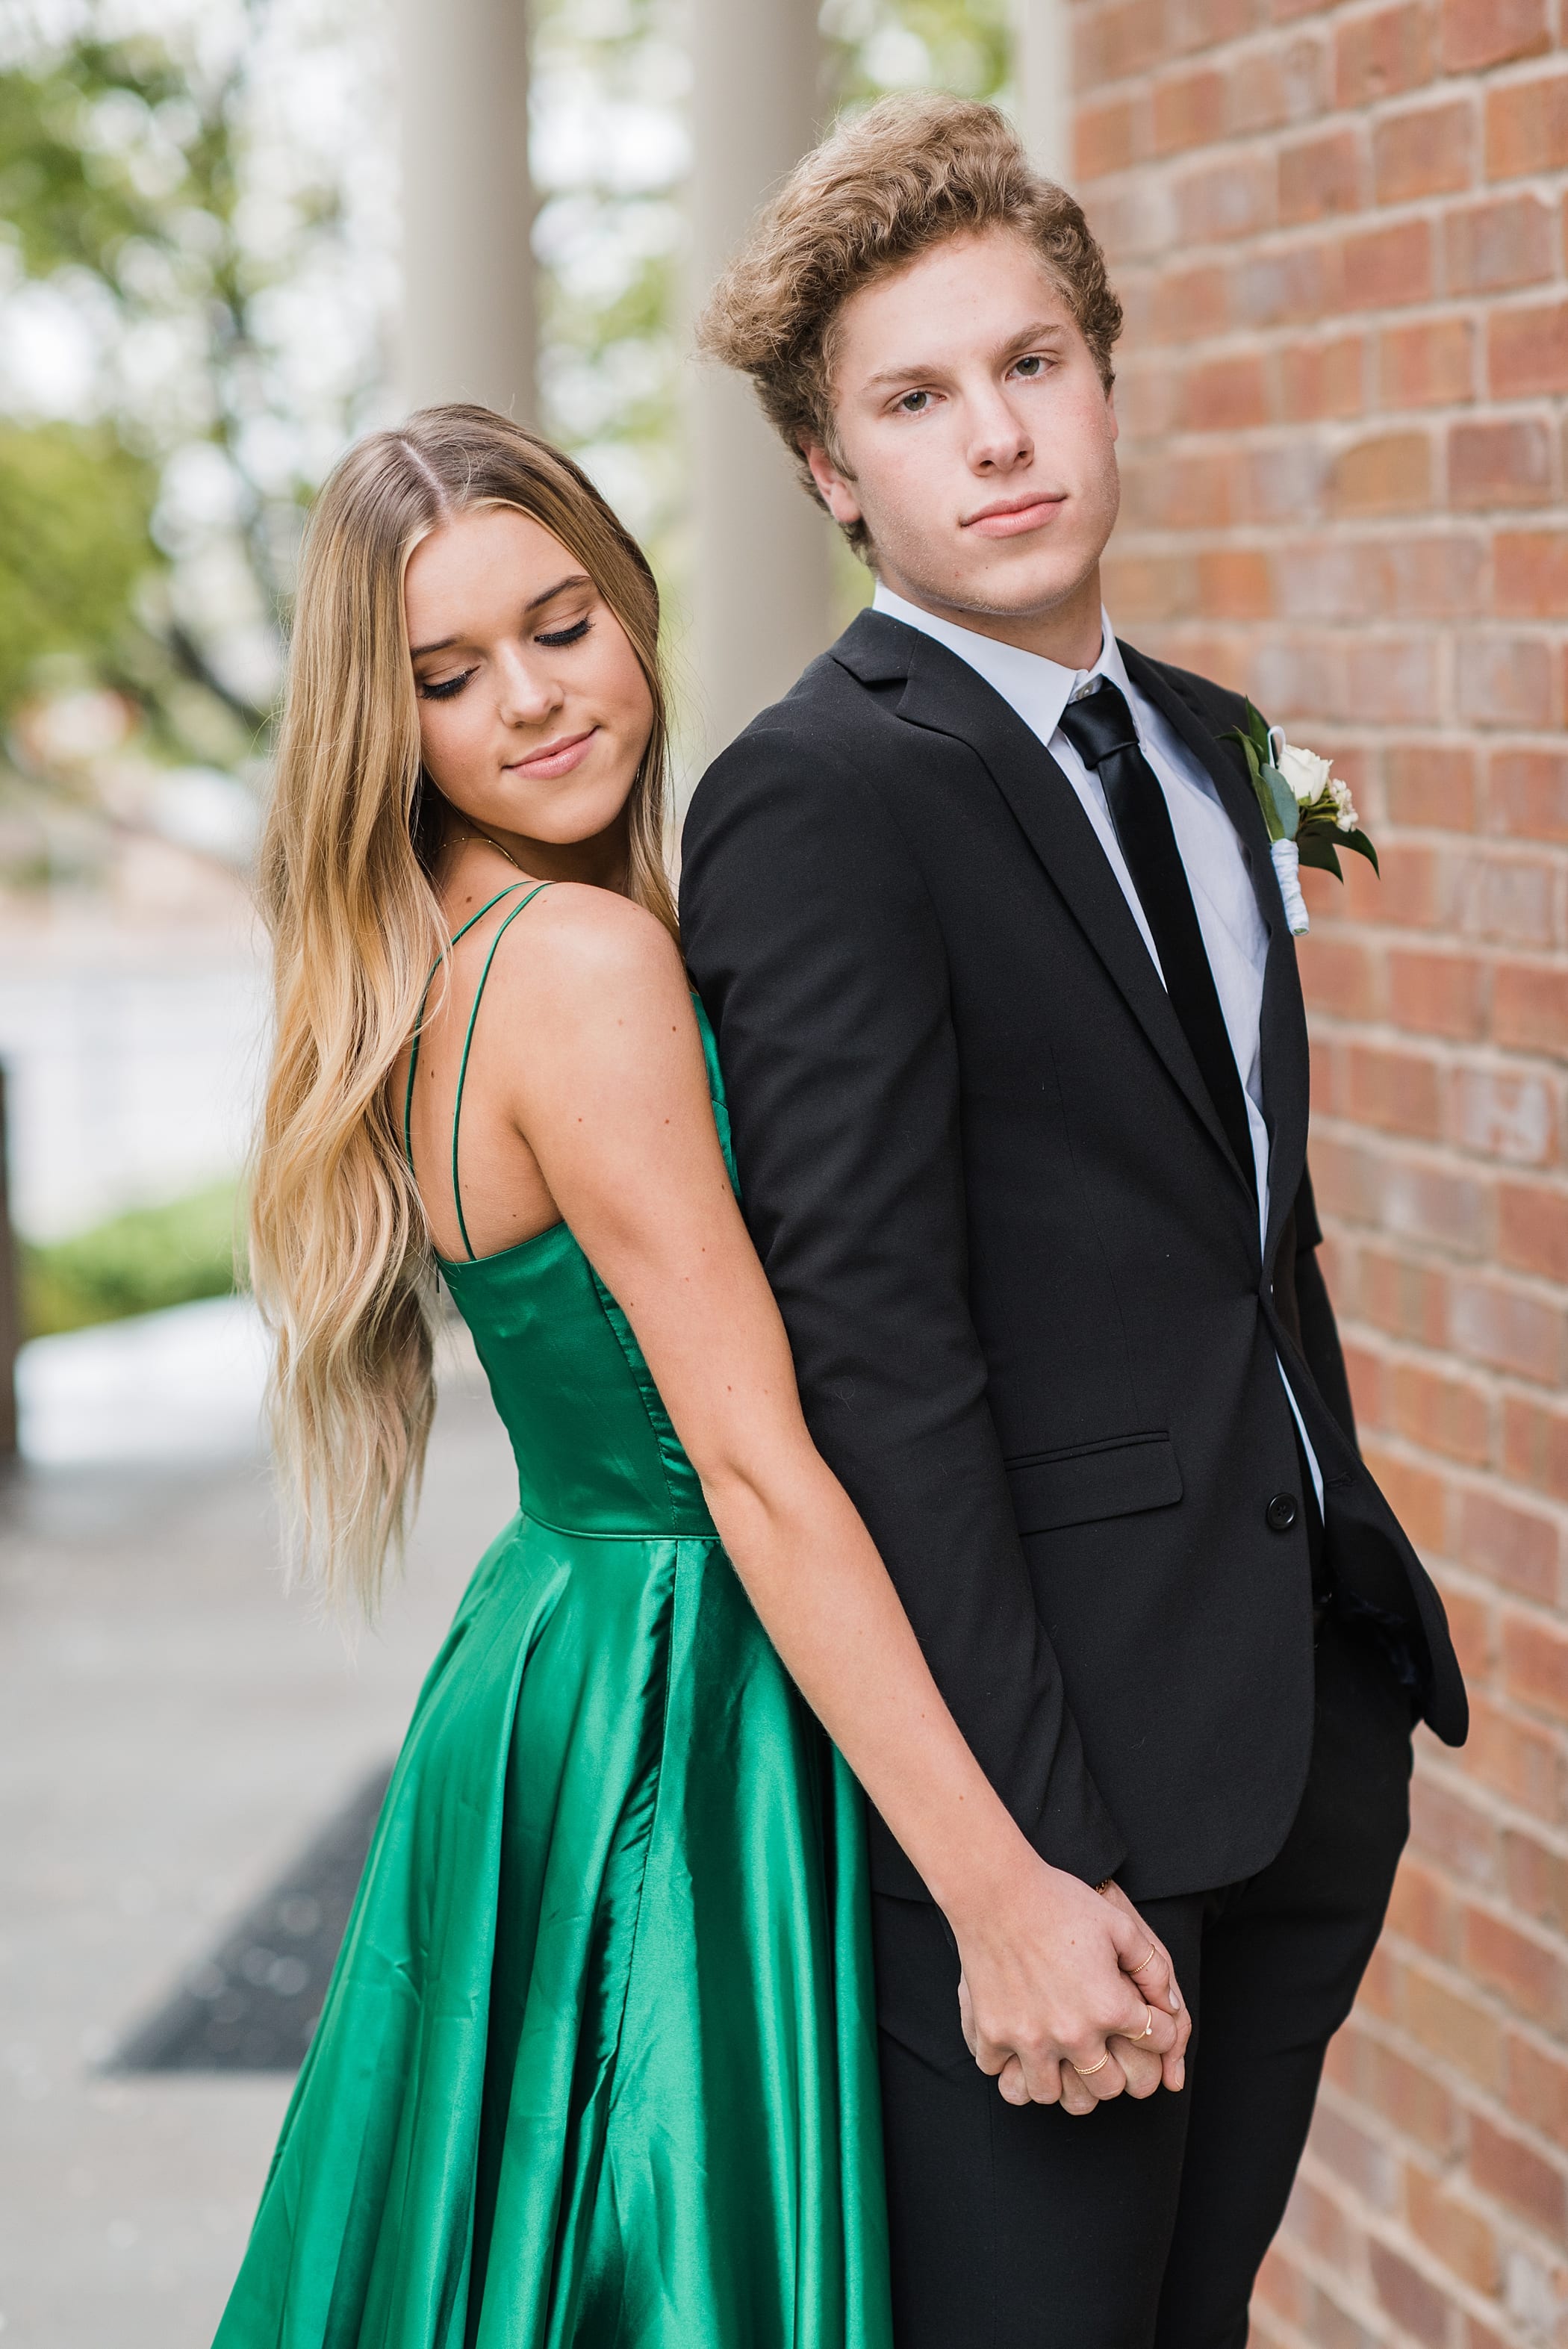 Idaho falls Senior Prom pictures Hillcrest High School by Michelle & Logan